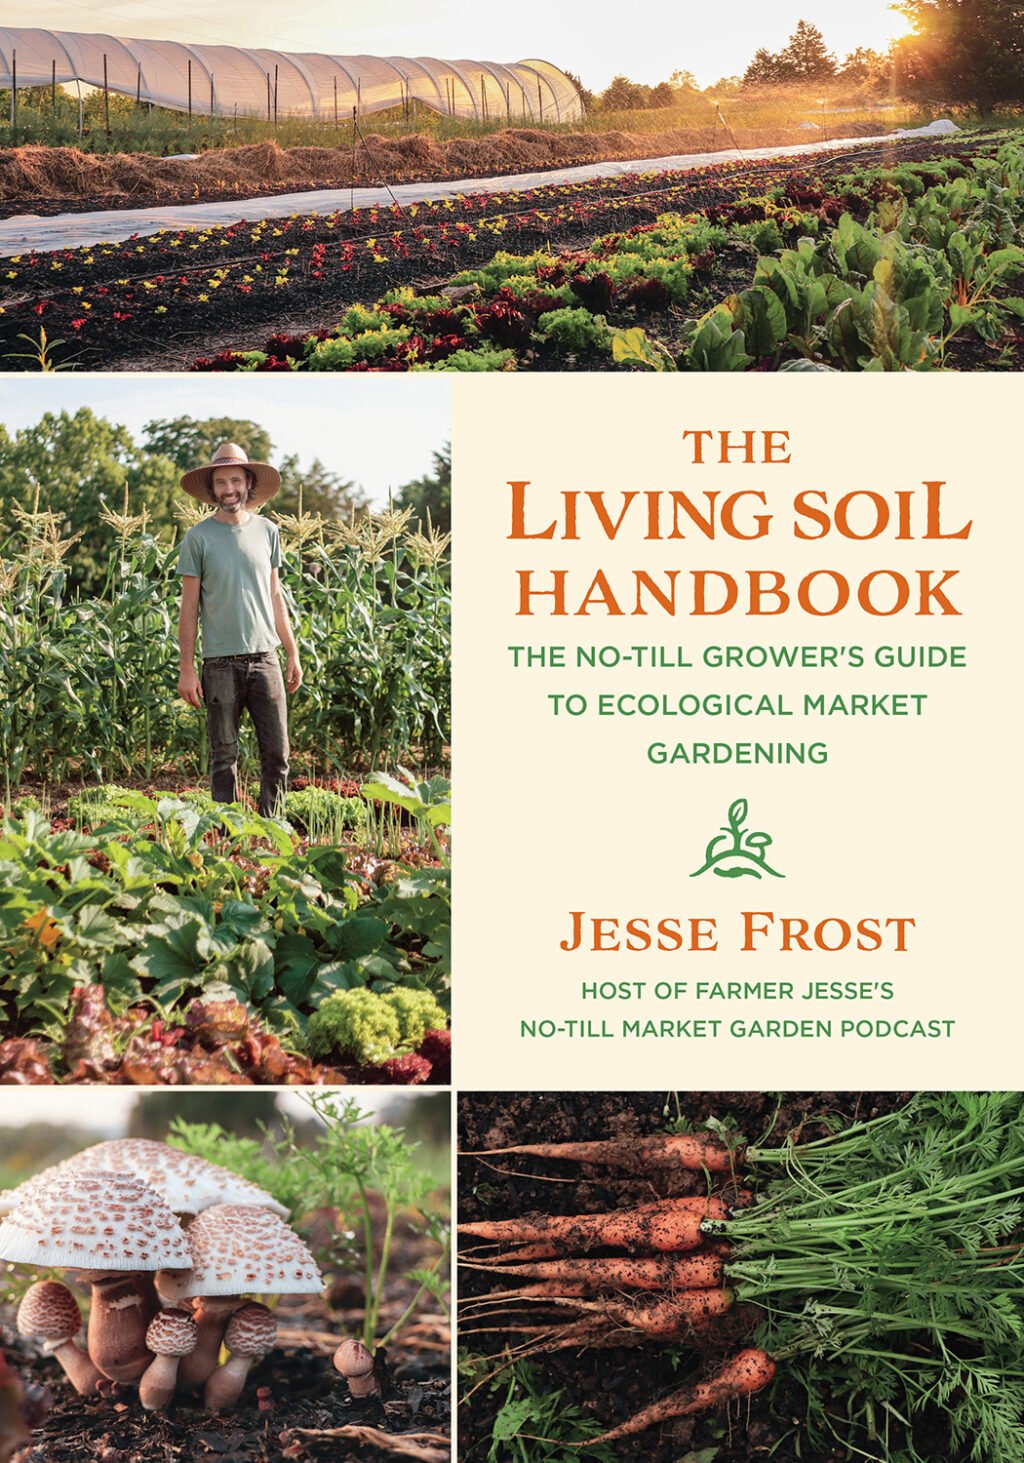 The Living Soil Handbook: The No-Till Grower’s Guide to Ecological Market Gardening by Jesse Frost - The Josephine Porter Institute